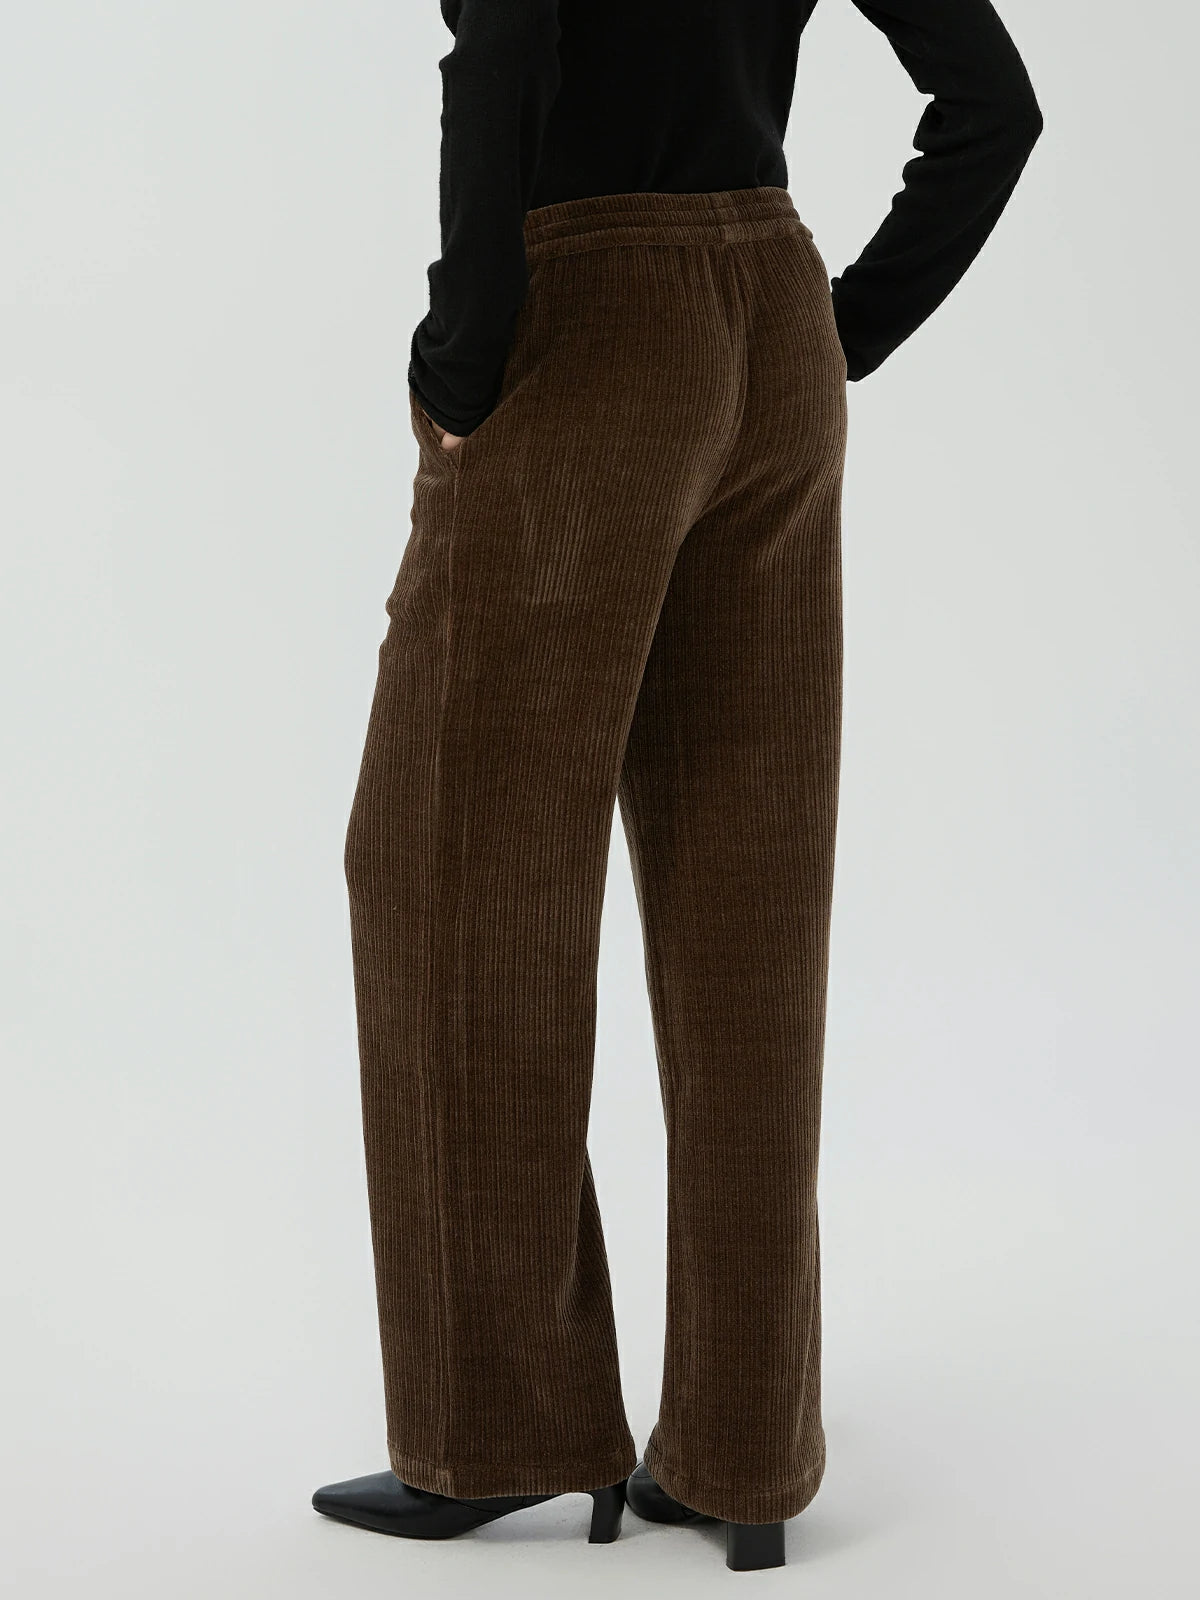 Versatility of high-quality corduroy fabric in straight-leg trousers